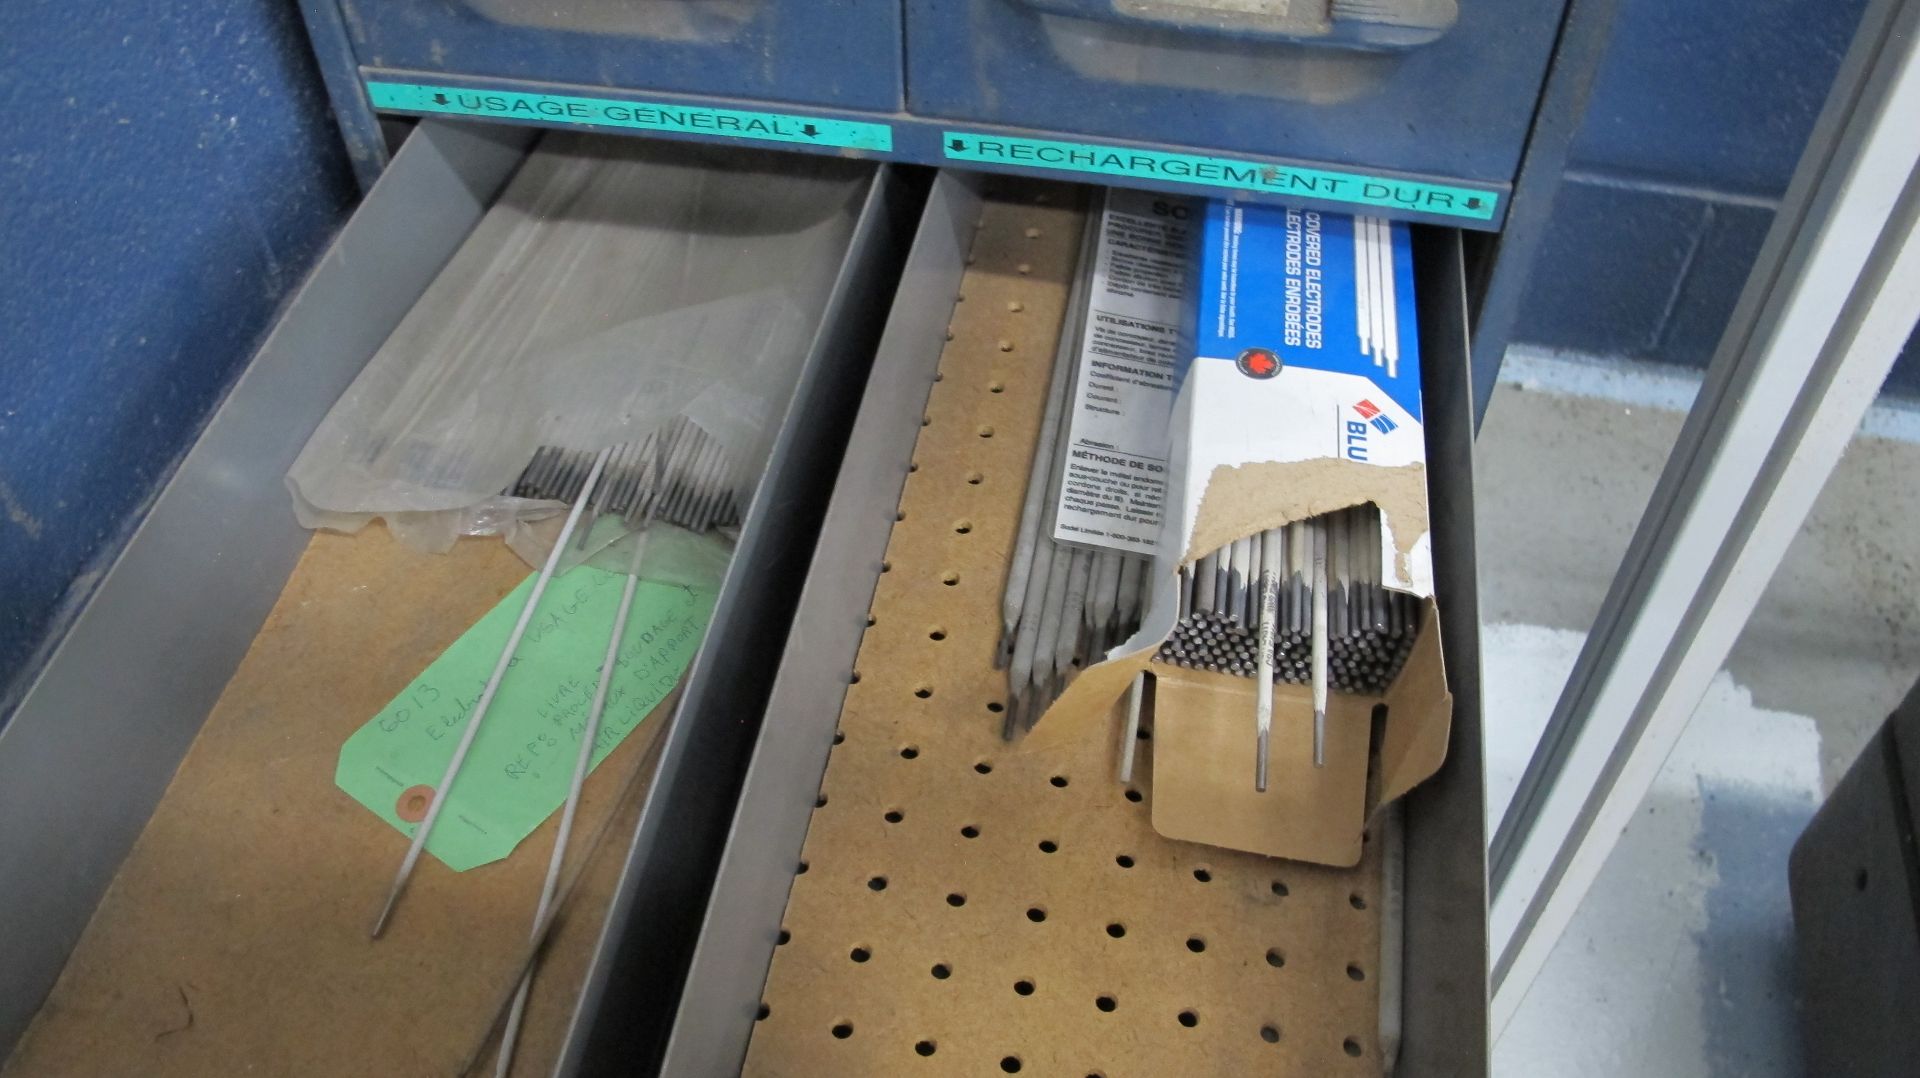 LOT OF WELDING ELECTRODES IN 10-LEVEL STORAGE CABINET AND WELDING SUPPLIES IN 2ND 10-LEVEL STORAGE - Image 6 of 14